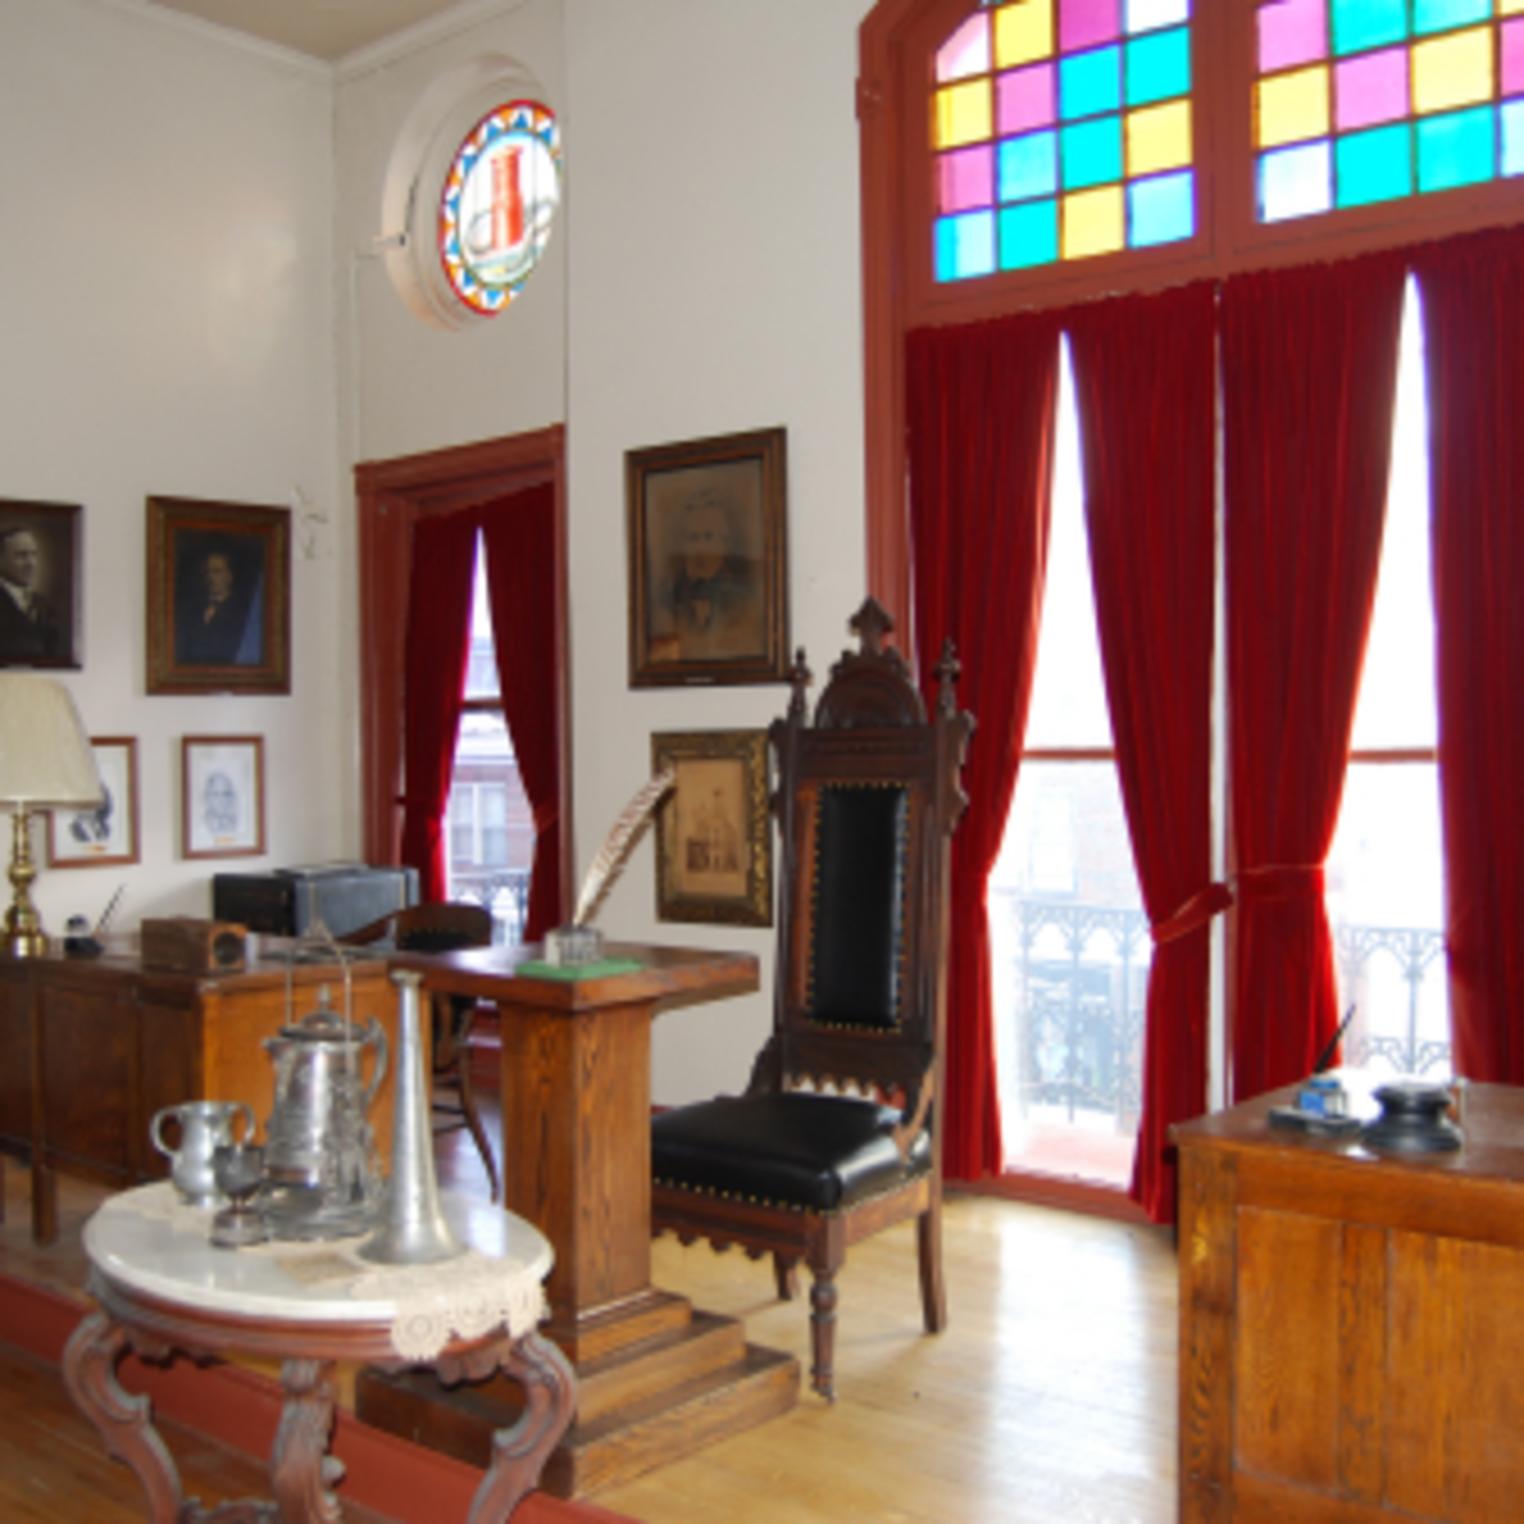 Historic Meeting Hall at the Union Fire Company No. 1 Museum